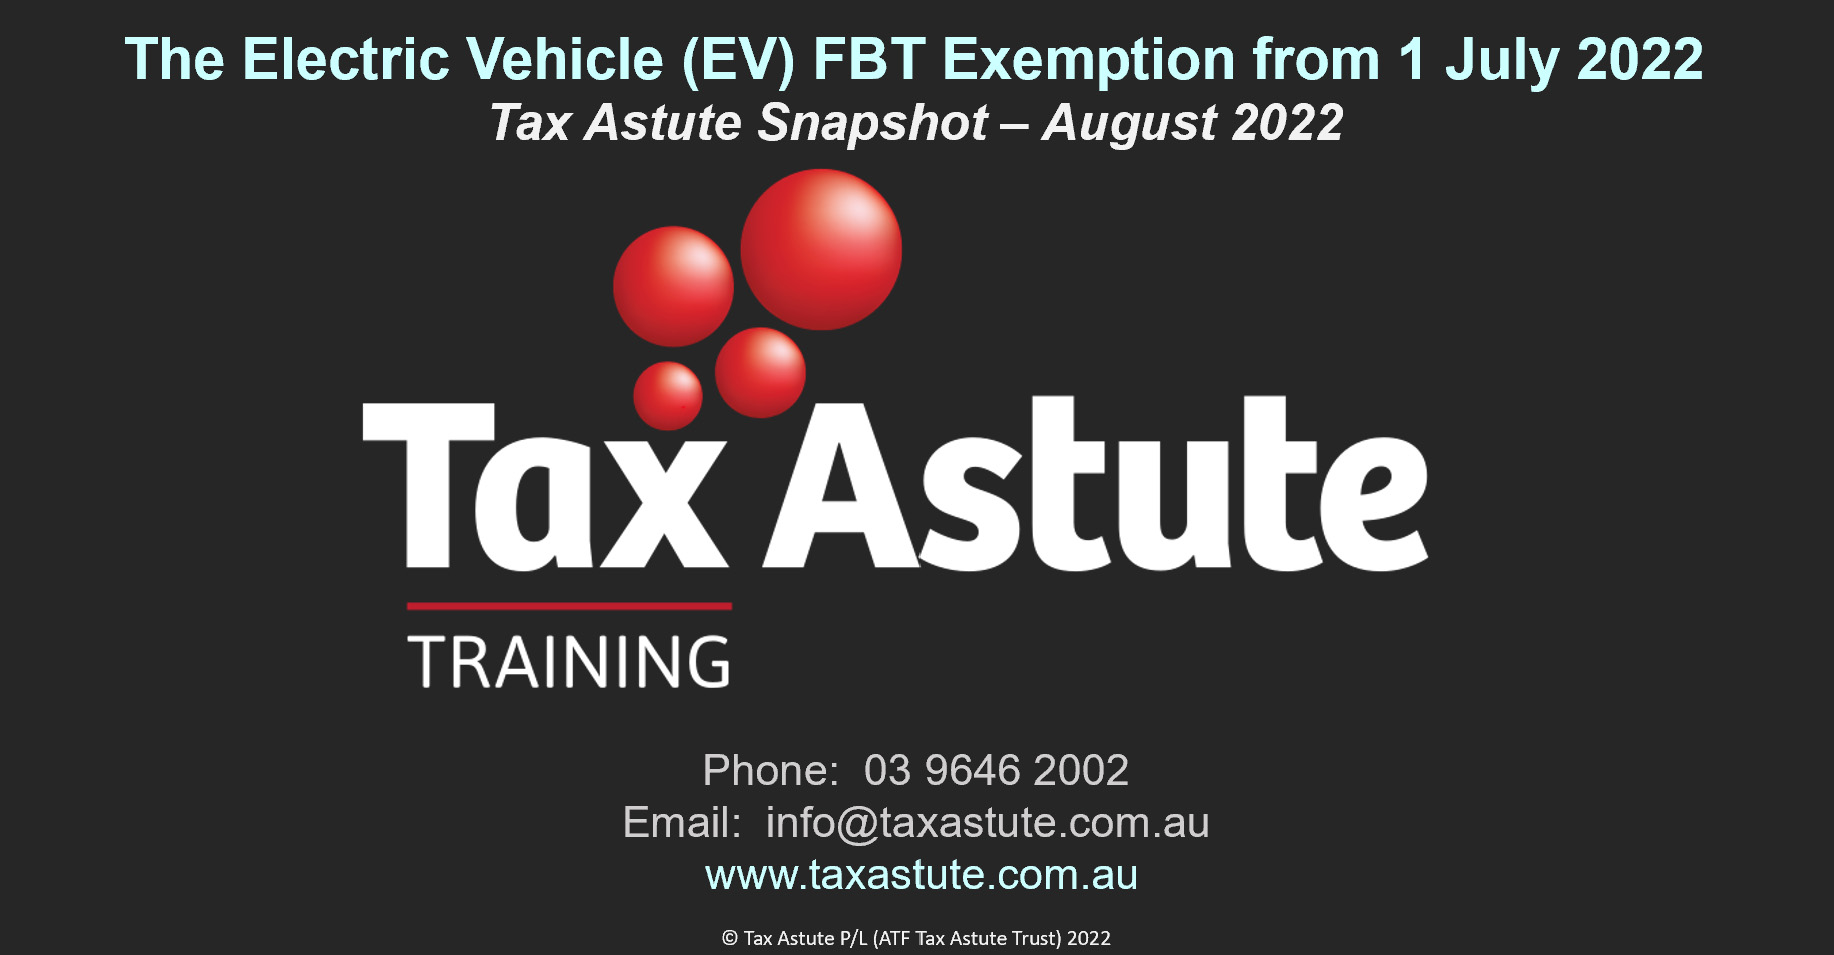 The Electric Vehicle (EV) FBT Exemption from 1 July 2022 Tax Astute